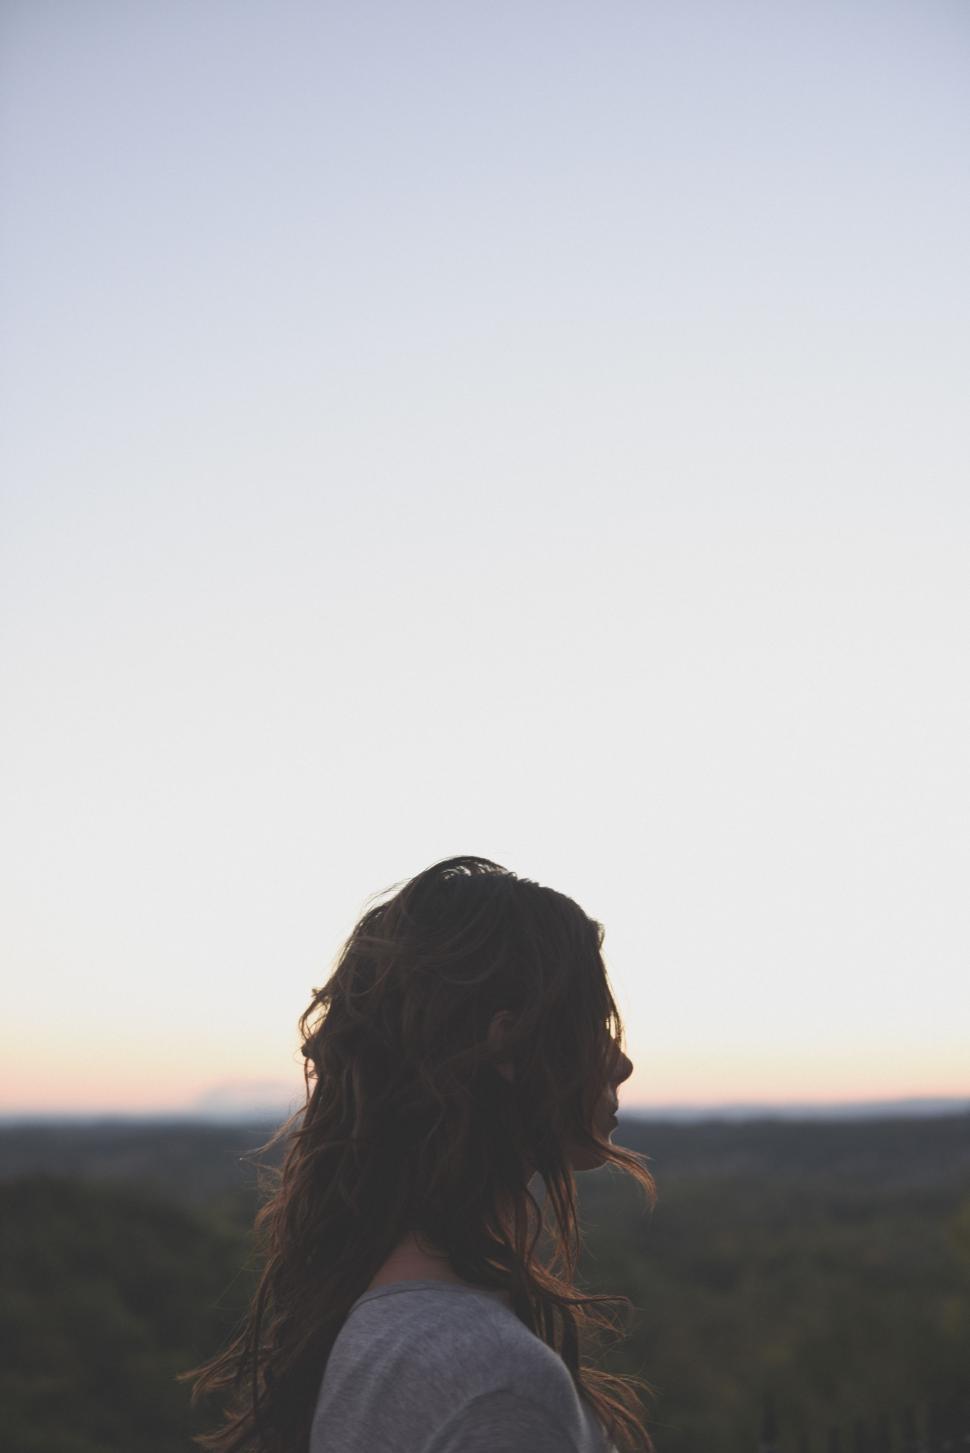 Free Image of Woman Standing in Front of Mountain at Sunset 